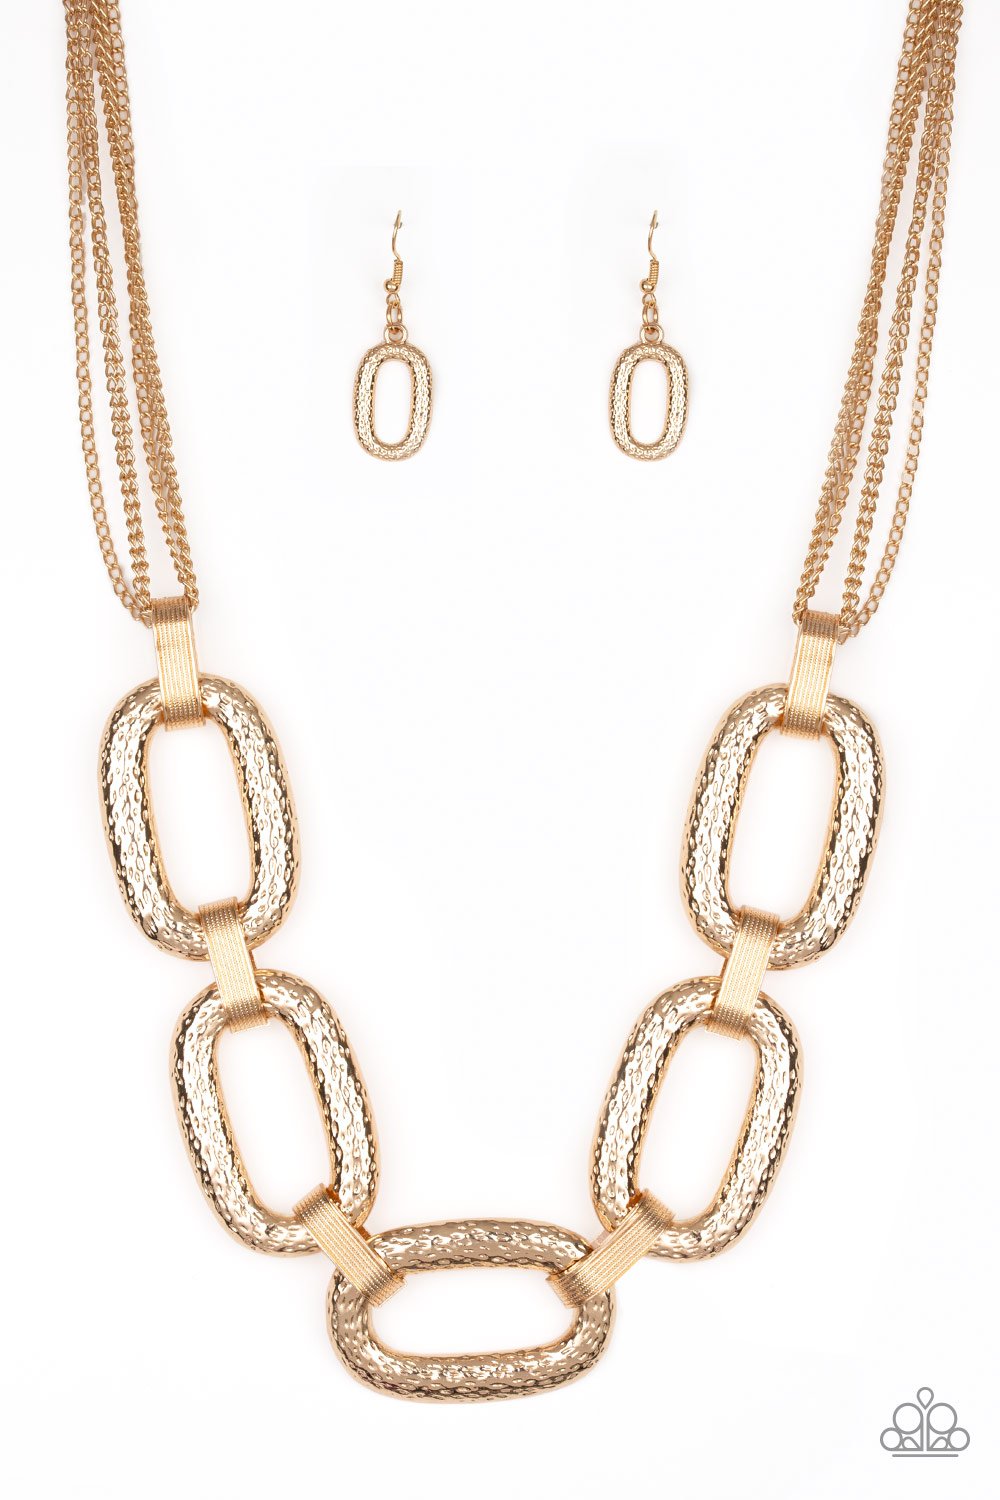 Take Charge-gold-Paparazzi necklace